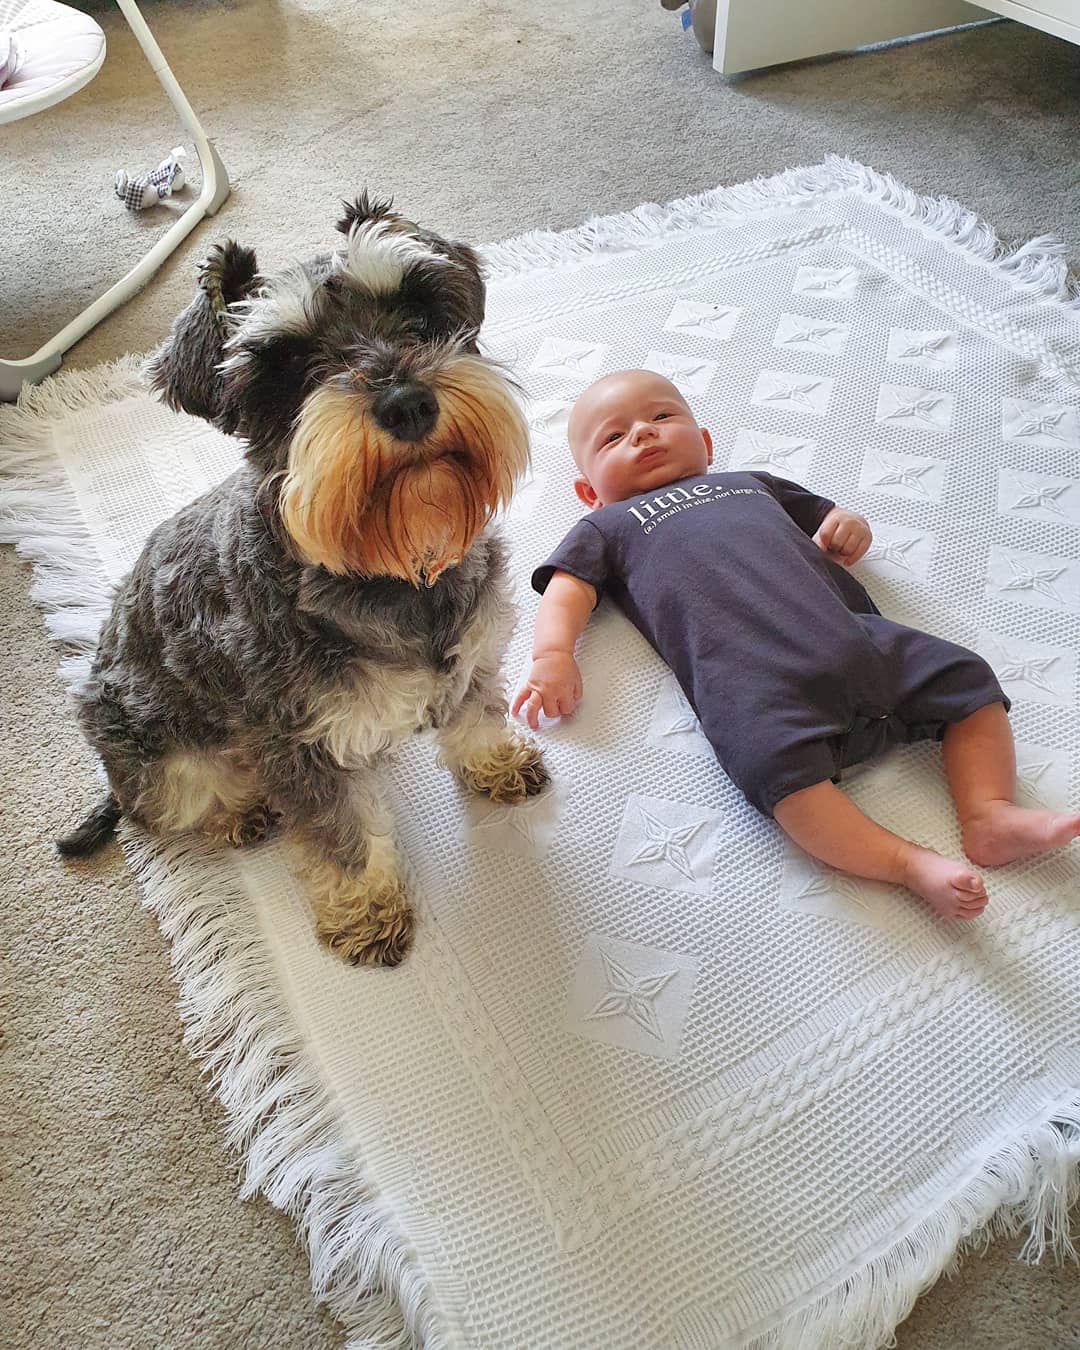 A Schnauzer sitting next to the baby lying on the carpet